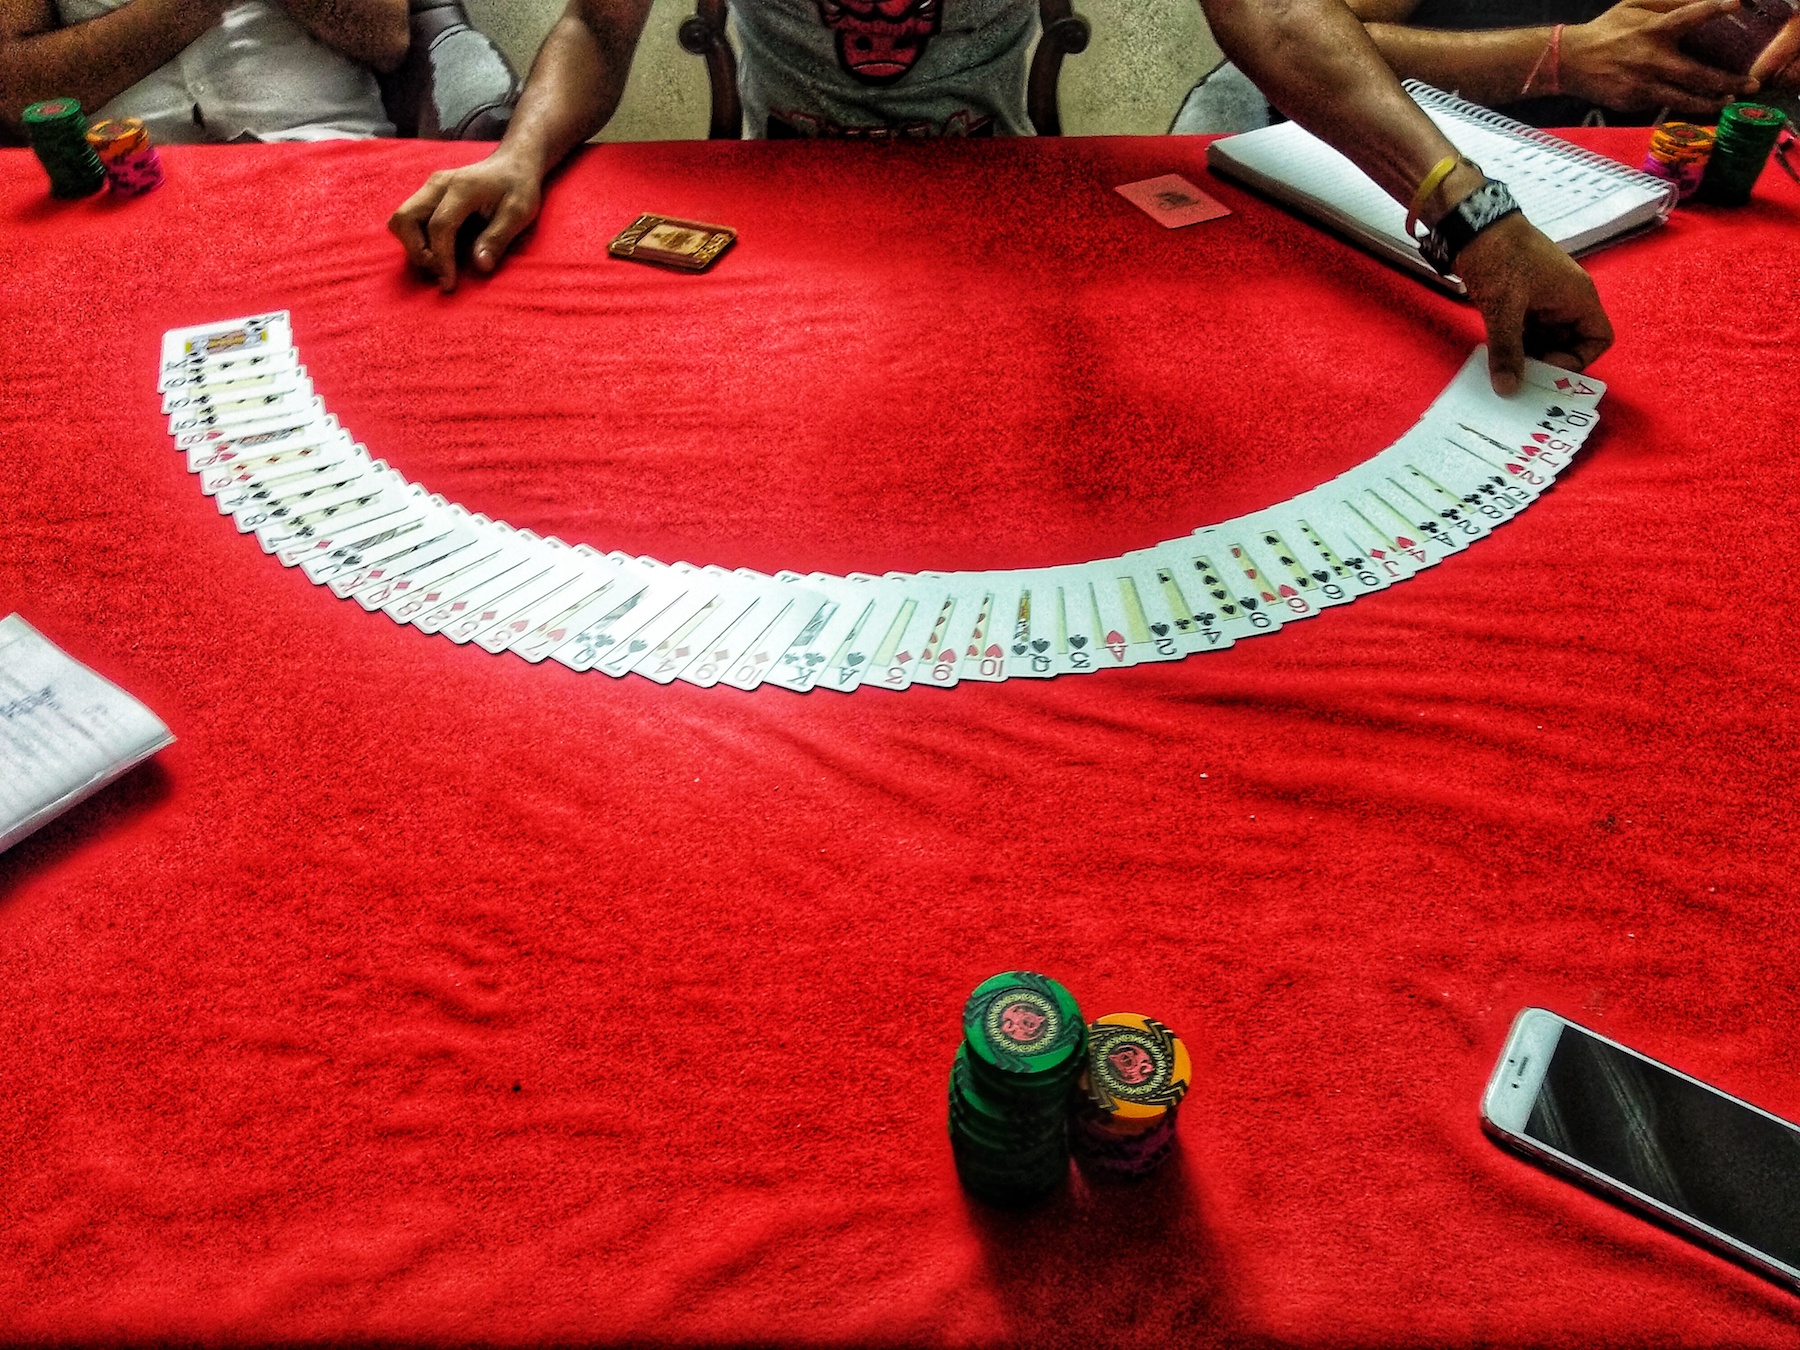 This Illegal Poker Club In Delhi Has 50k Chips And A Pot